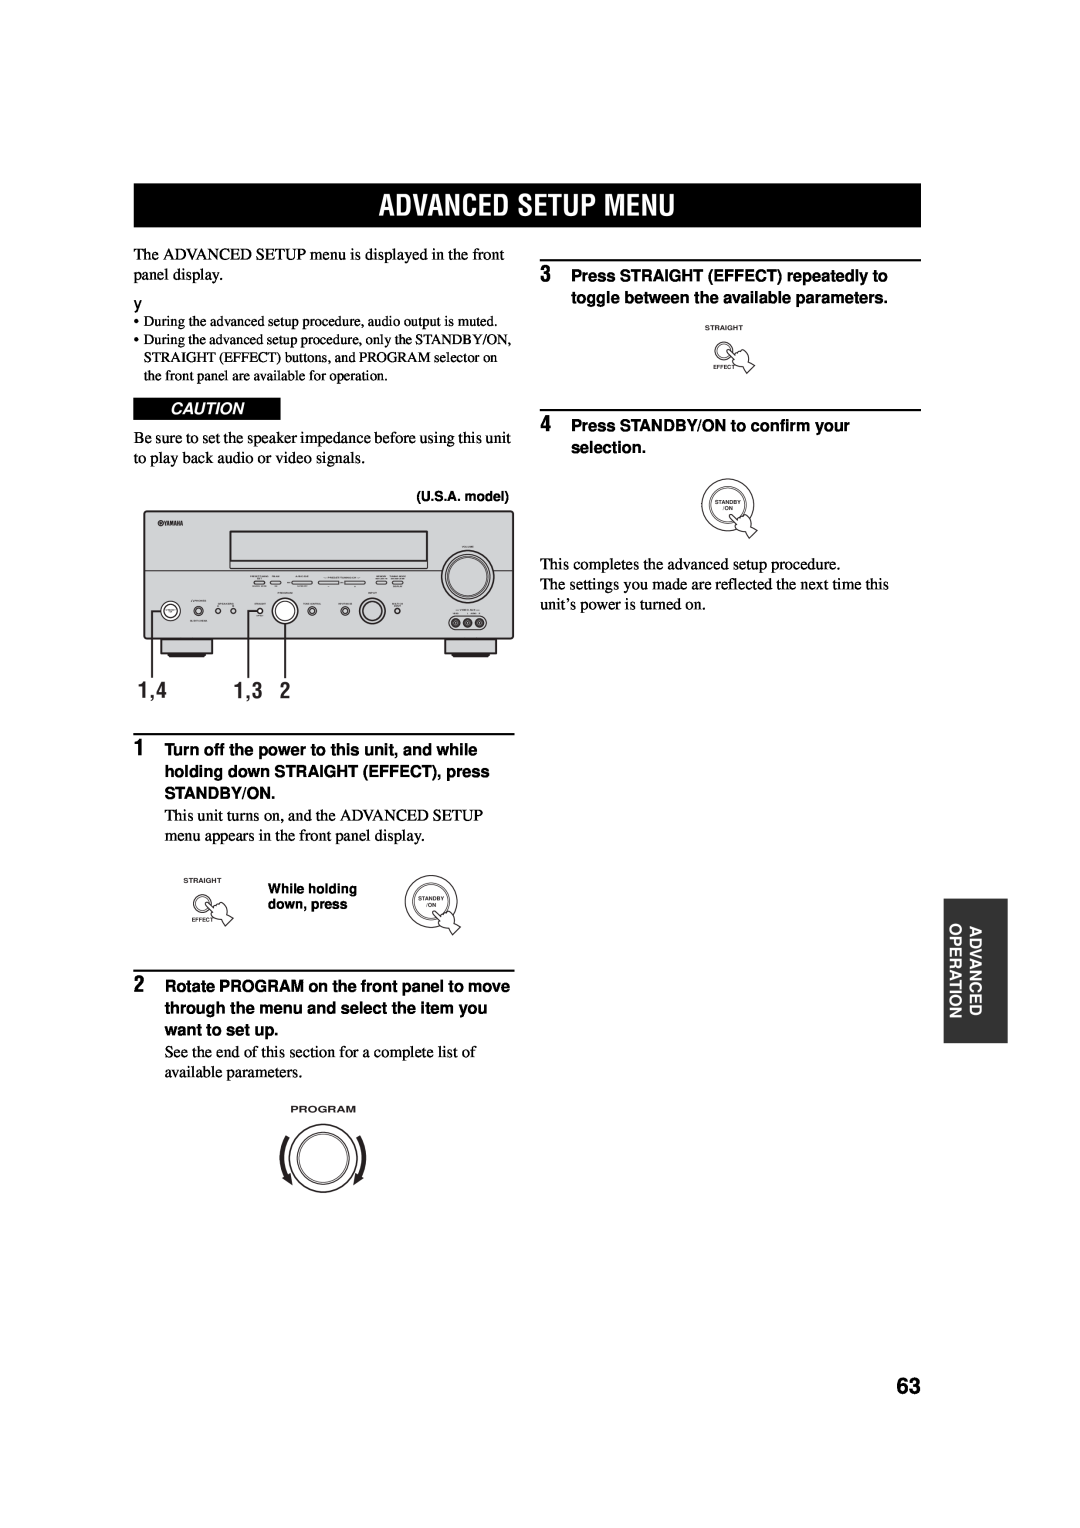 Yamaha AV Receiver owner manual Advanced Setup Menu, 4Press STANDBY/ON to confirm your selection, Standby/On 